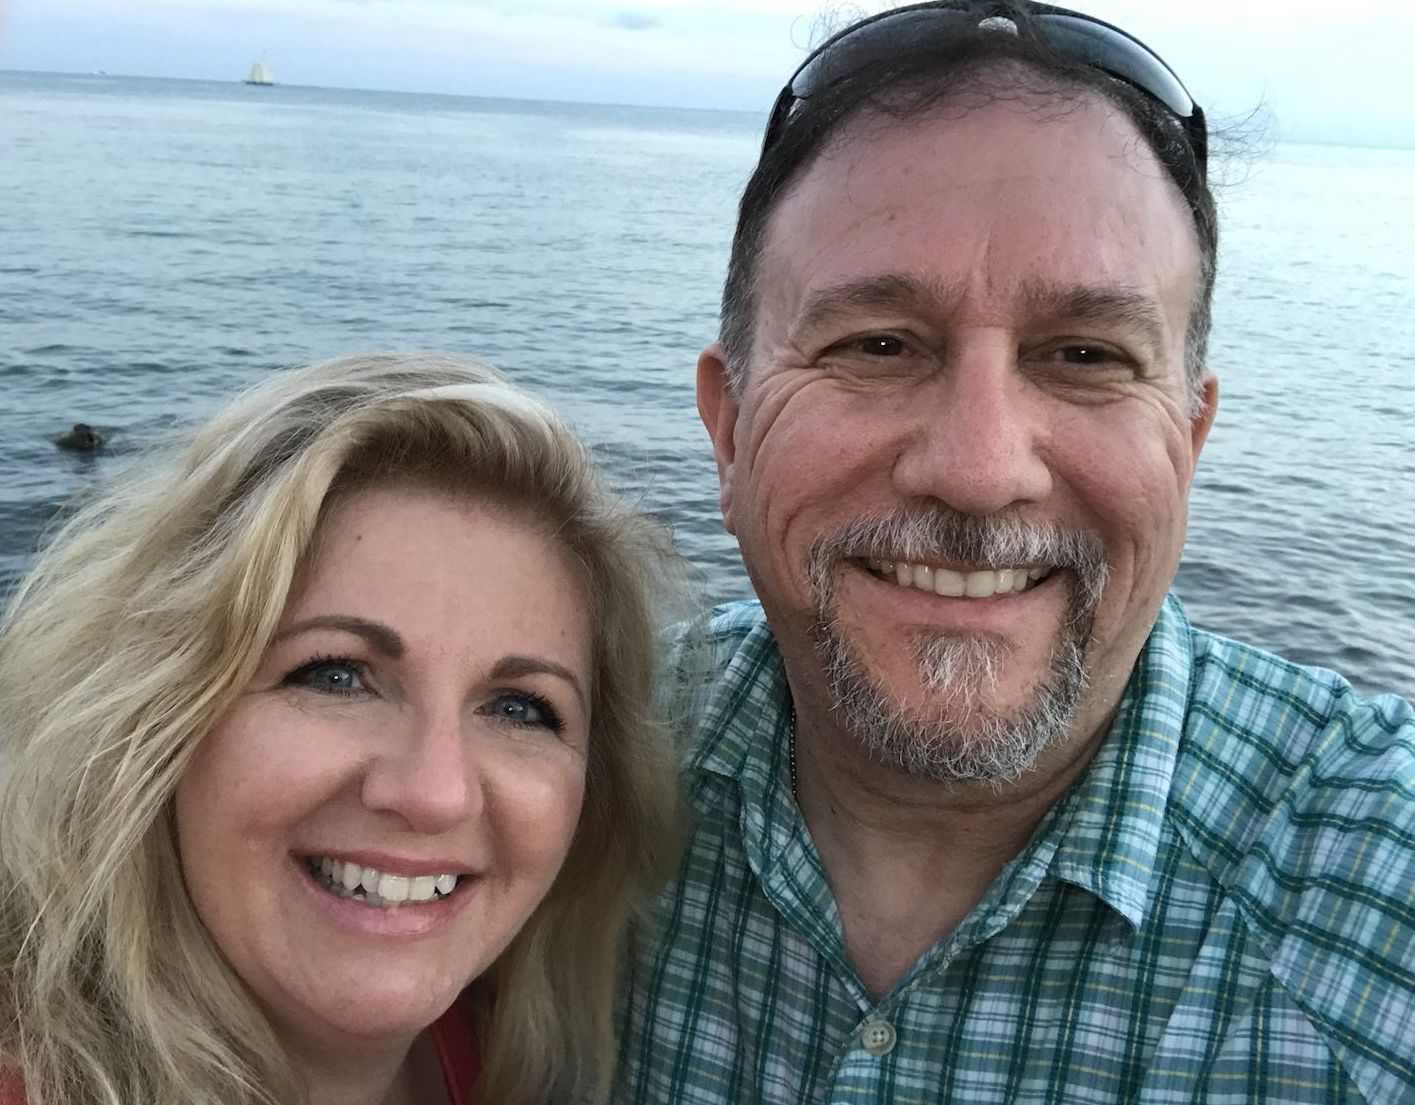 A woman with a beautiful smile poses with her husband in front of the ocean